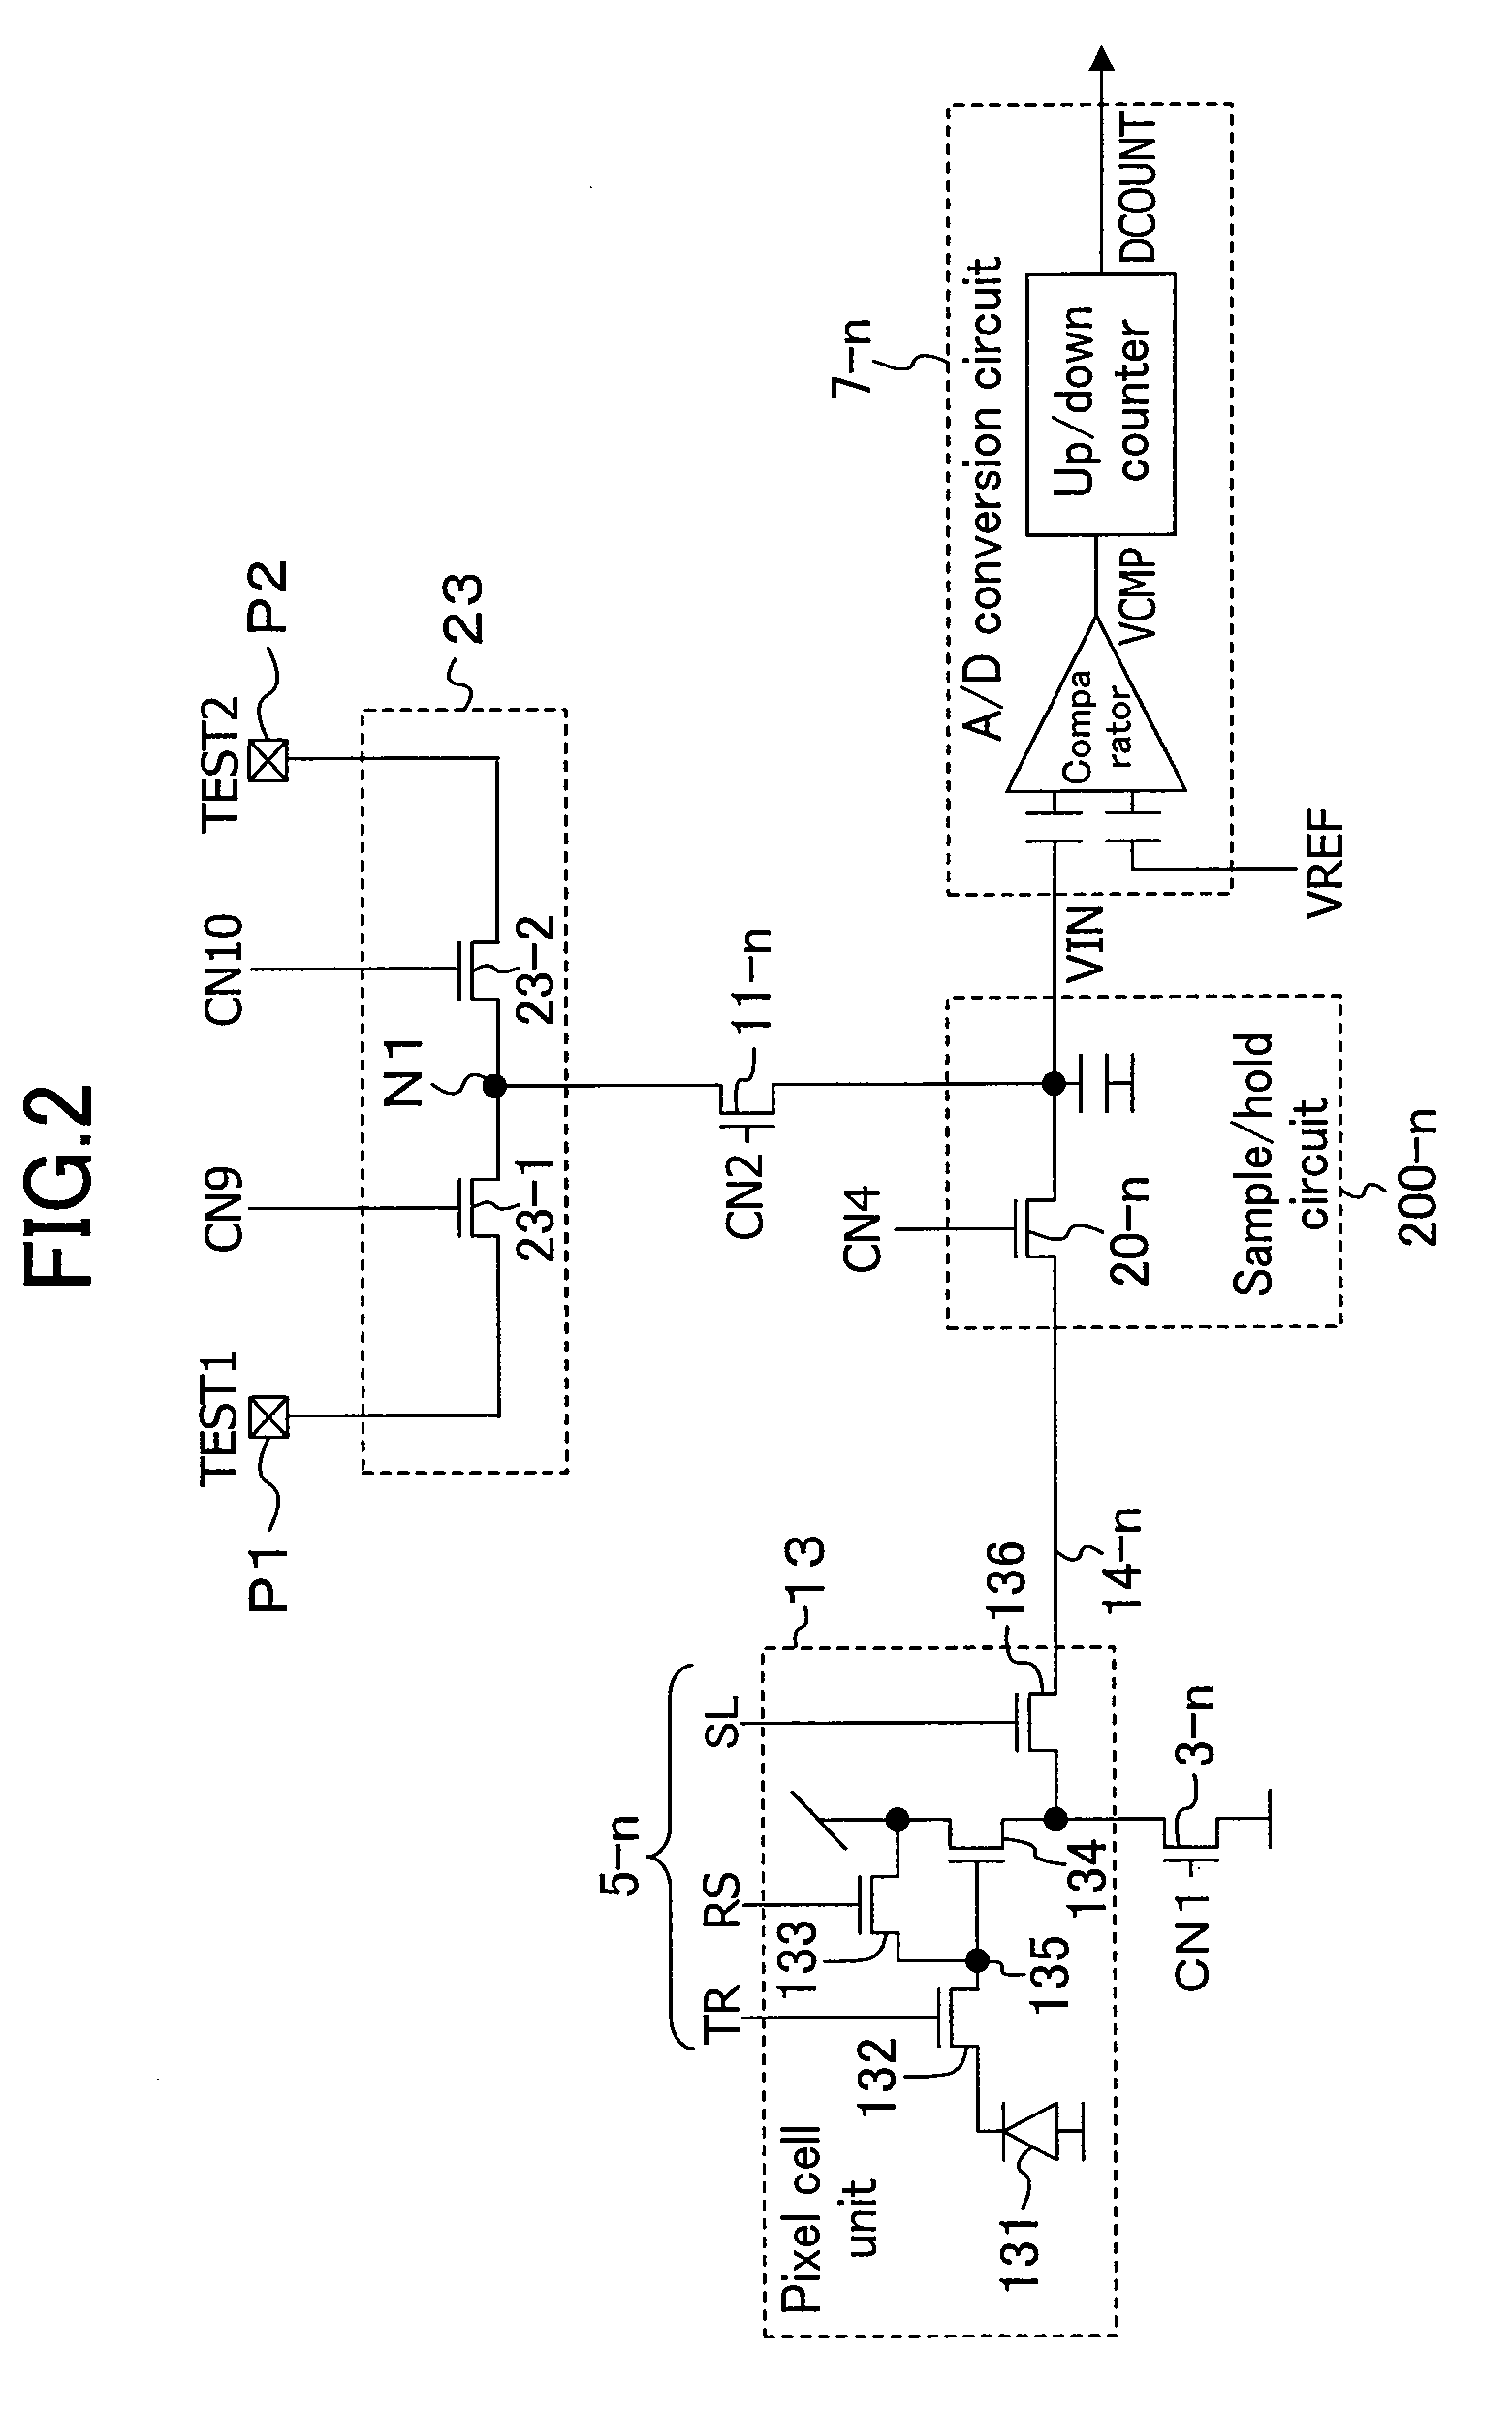 A/d converter-incorporated solid-state imaging device